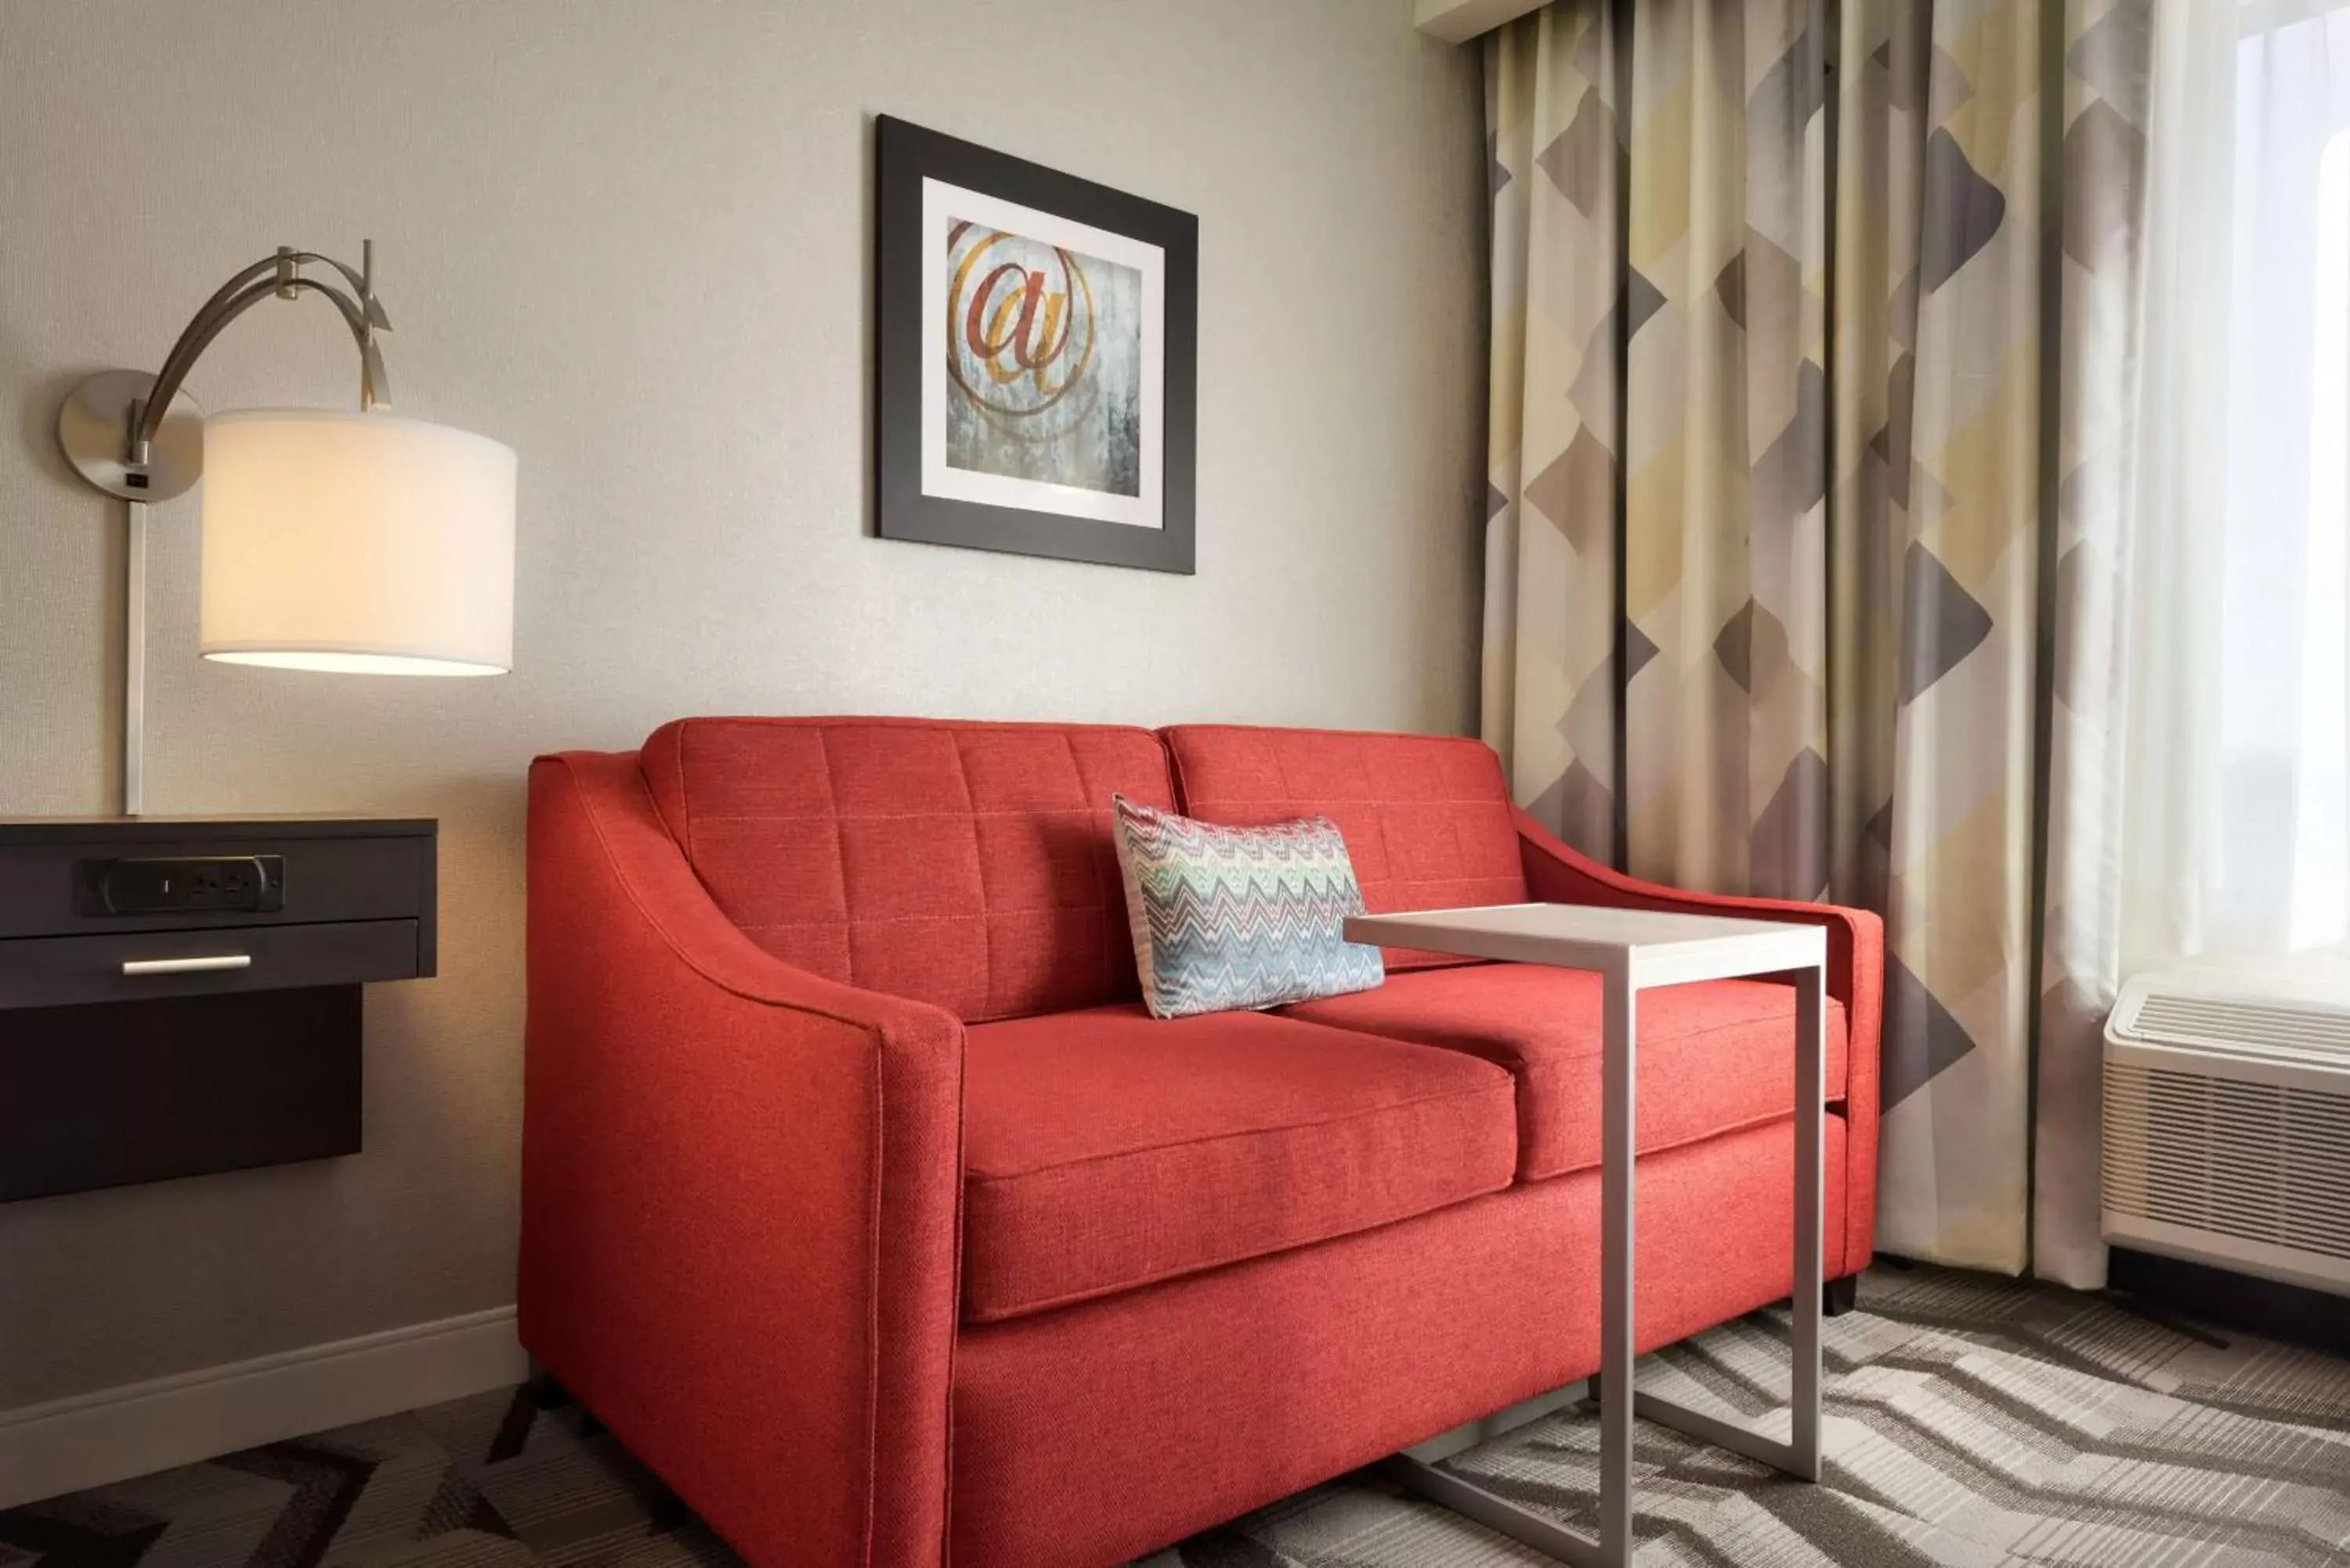 Bed, Seating Area in Hampton Inn by Hilton Spring Hill, TN